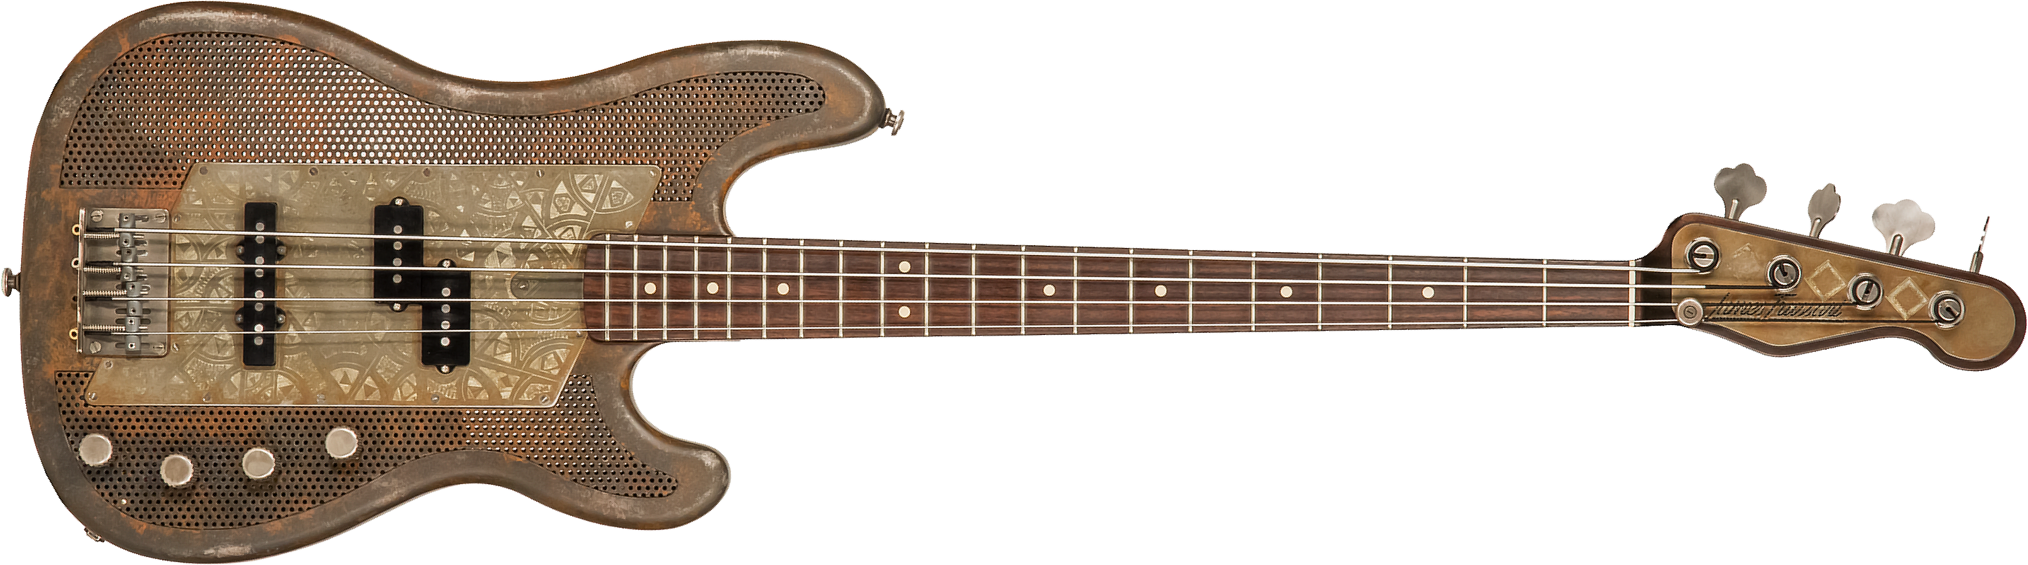 James Trussart Steelcaster Bass Perforated Active Pf #19045 - Rust O Matic African Engraved - Basse Électrique Solid Body - Main picture